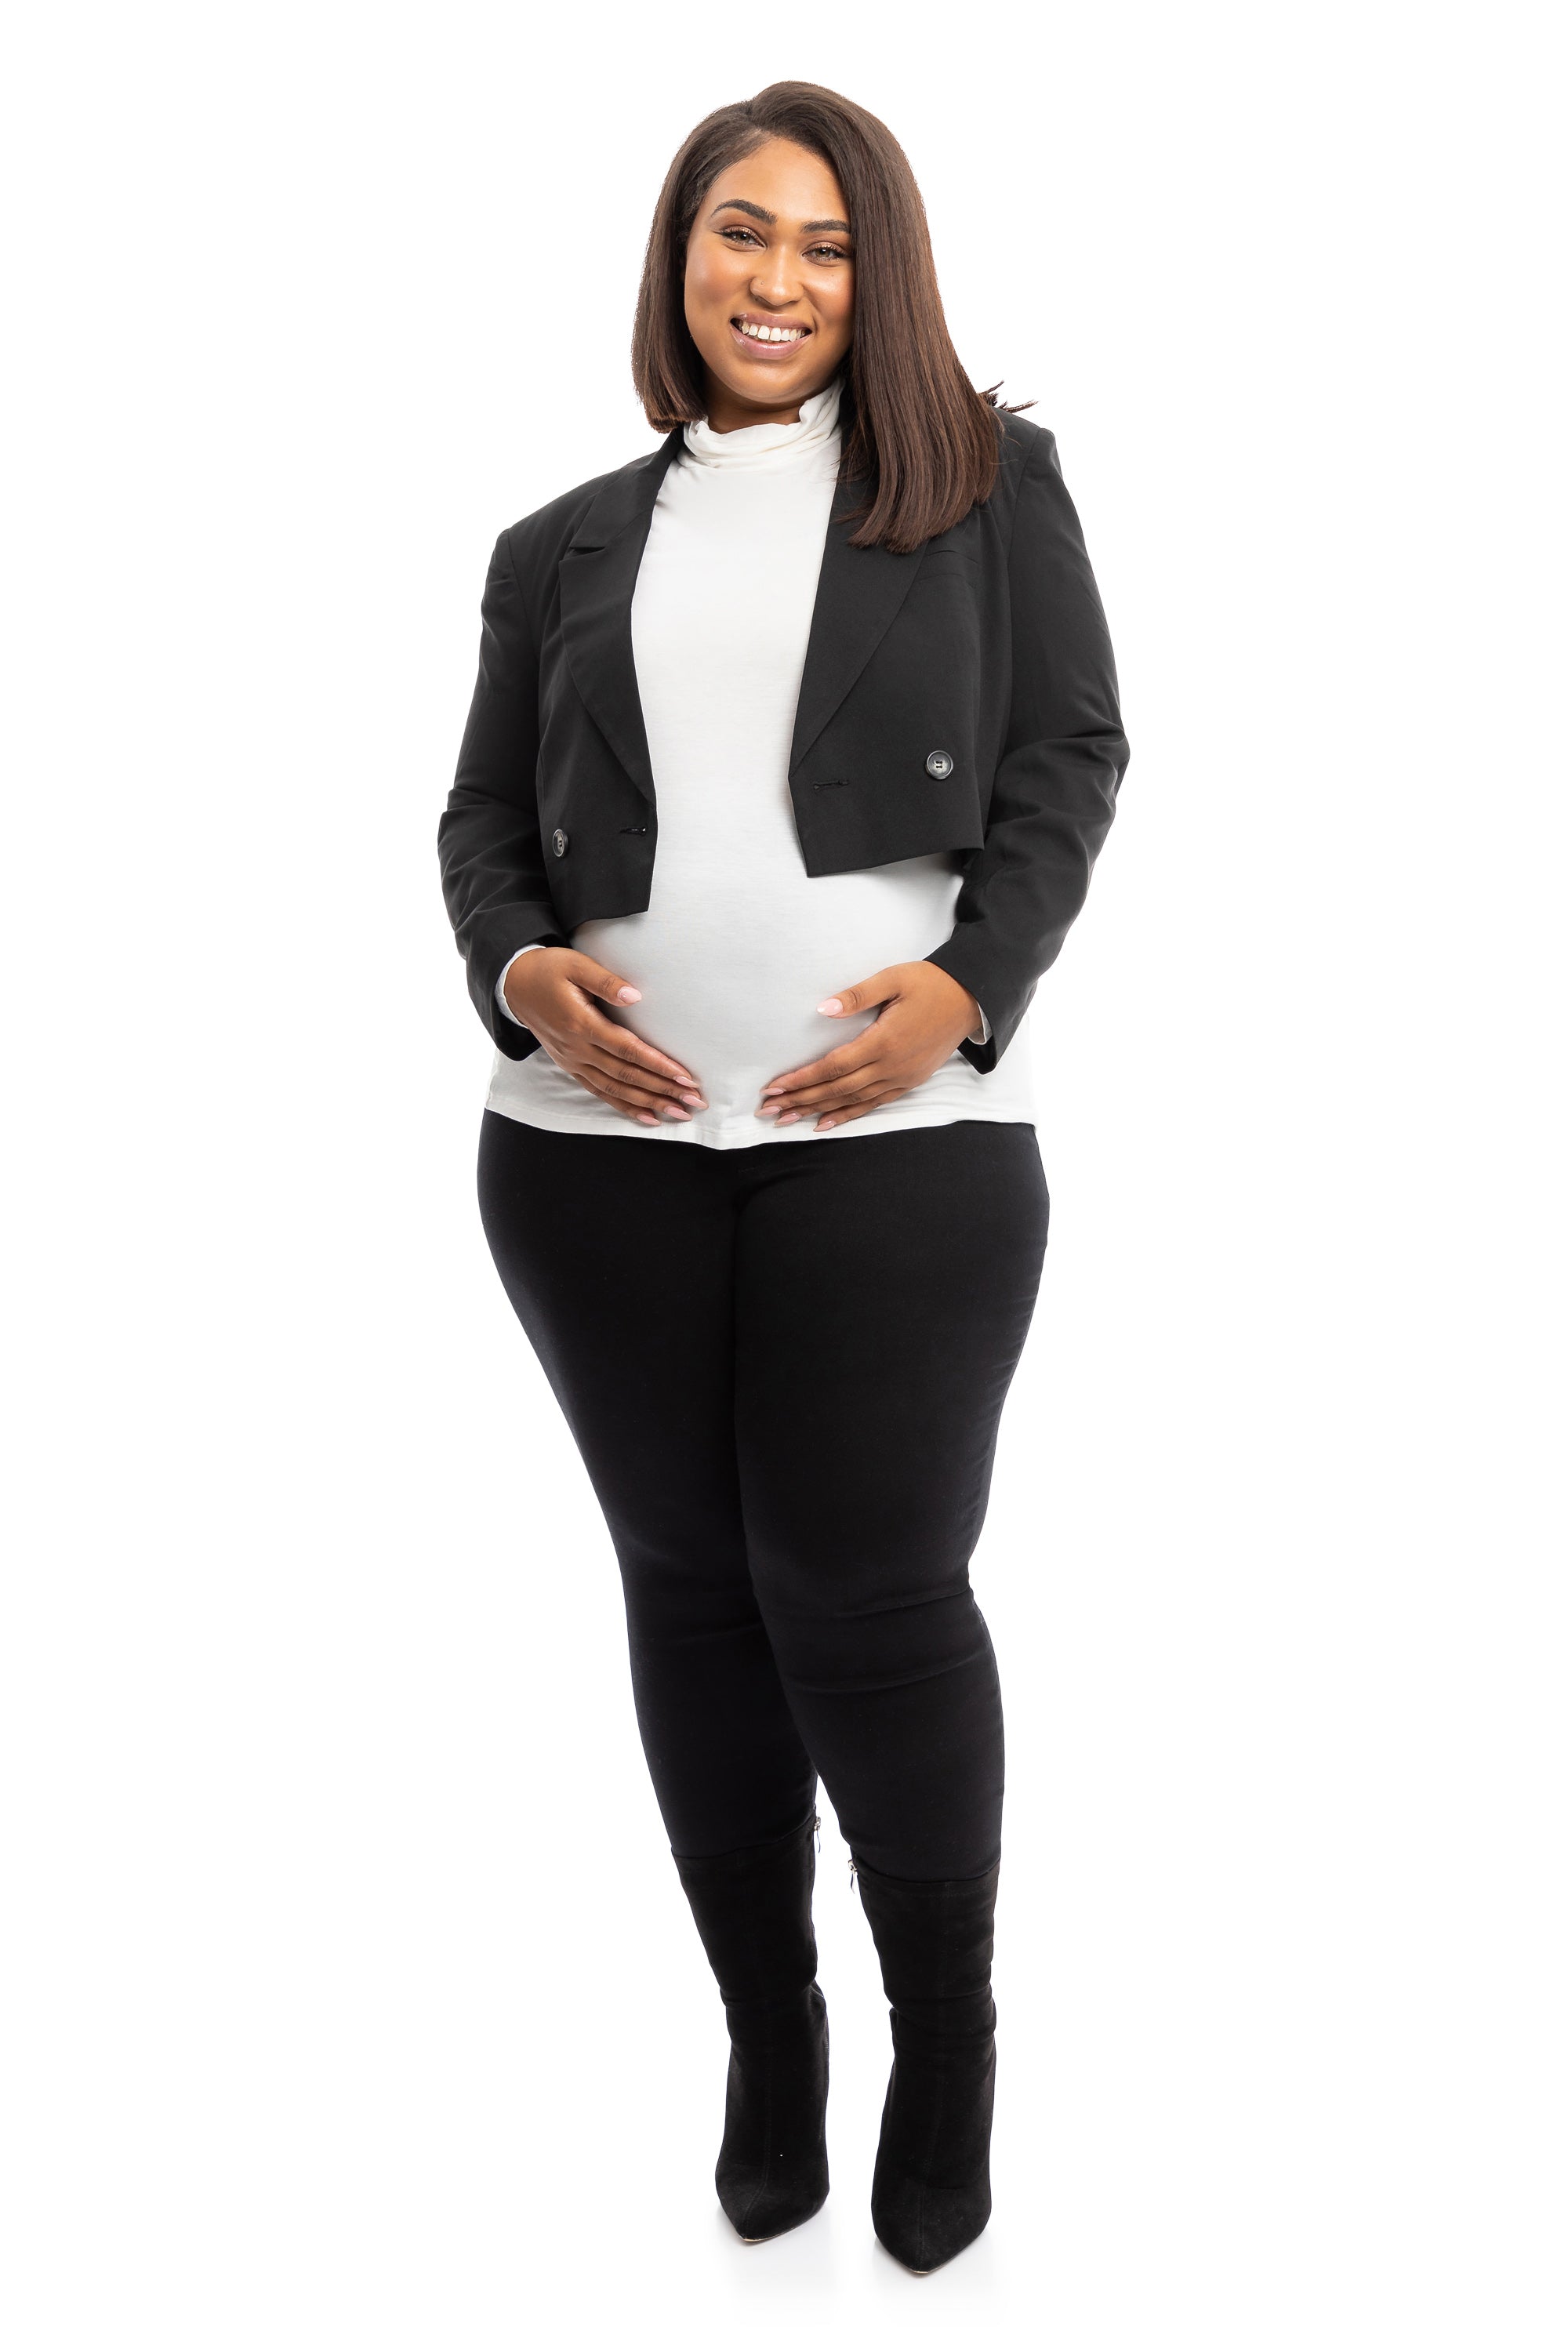 Plus Size Maternity Jeans & Jeggings